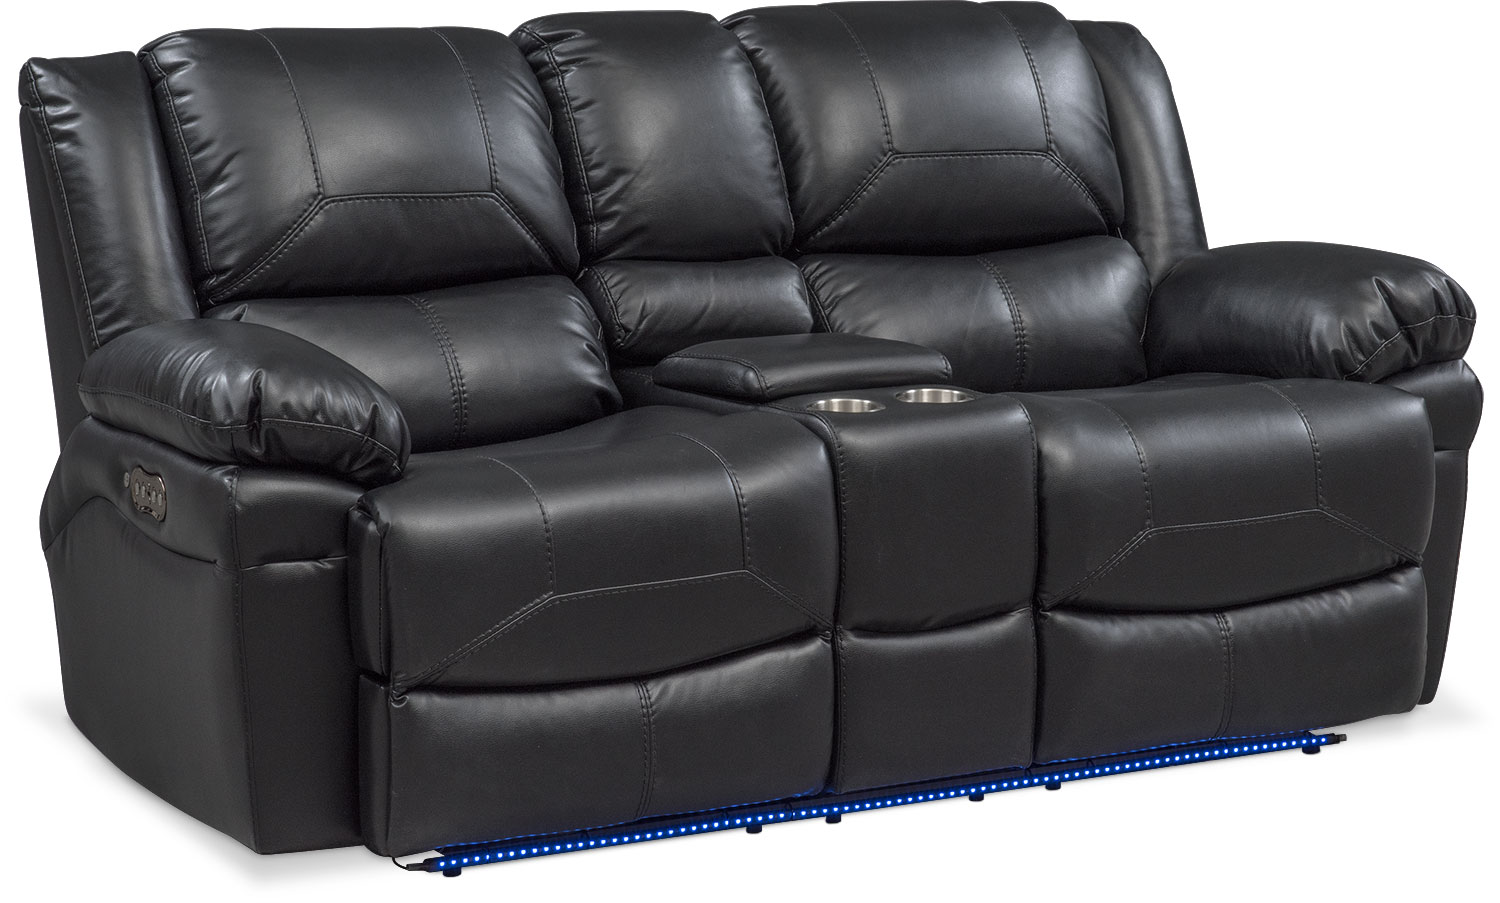 leather reclining loveseat with console living room furniture - monza dual power reclining loveseat with QANIQQF